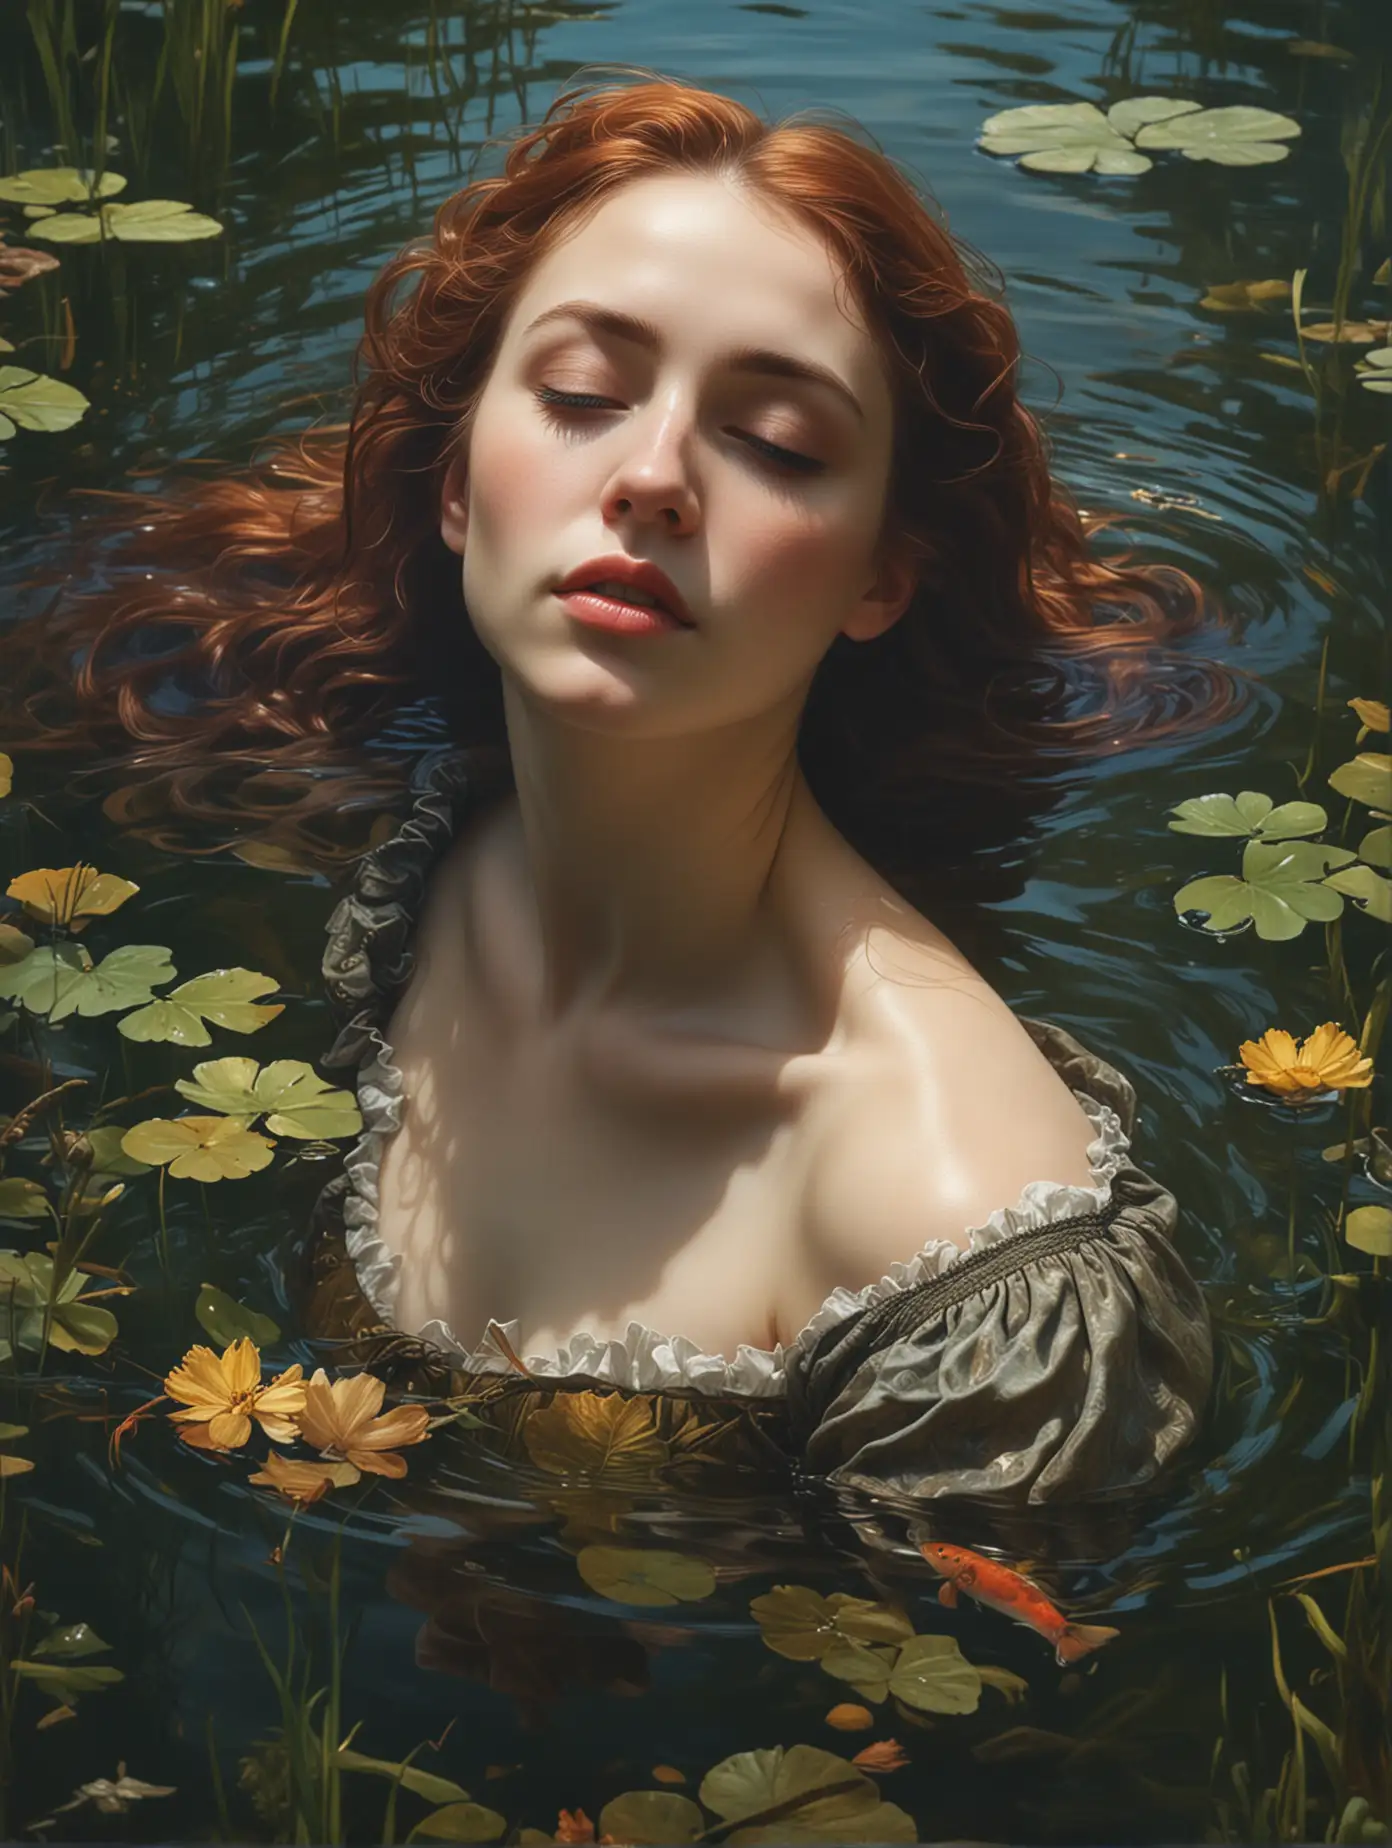 Ophelia's dream, close up of lady in the lake, Low saturation colour photography, Warm Lighting Style, vintage, top light, masterful painting in the style of John Everett Millais, | Marco Mazzoni | Yuri Ivanovich, Todd McFarlane, Aleksi Briclot, oil on canvas, highly detailed